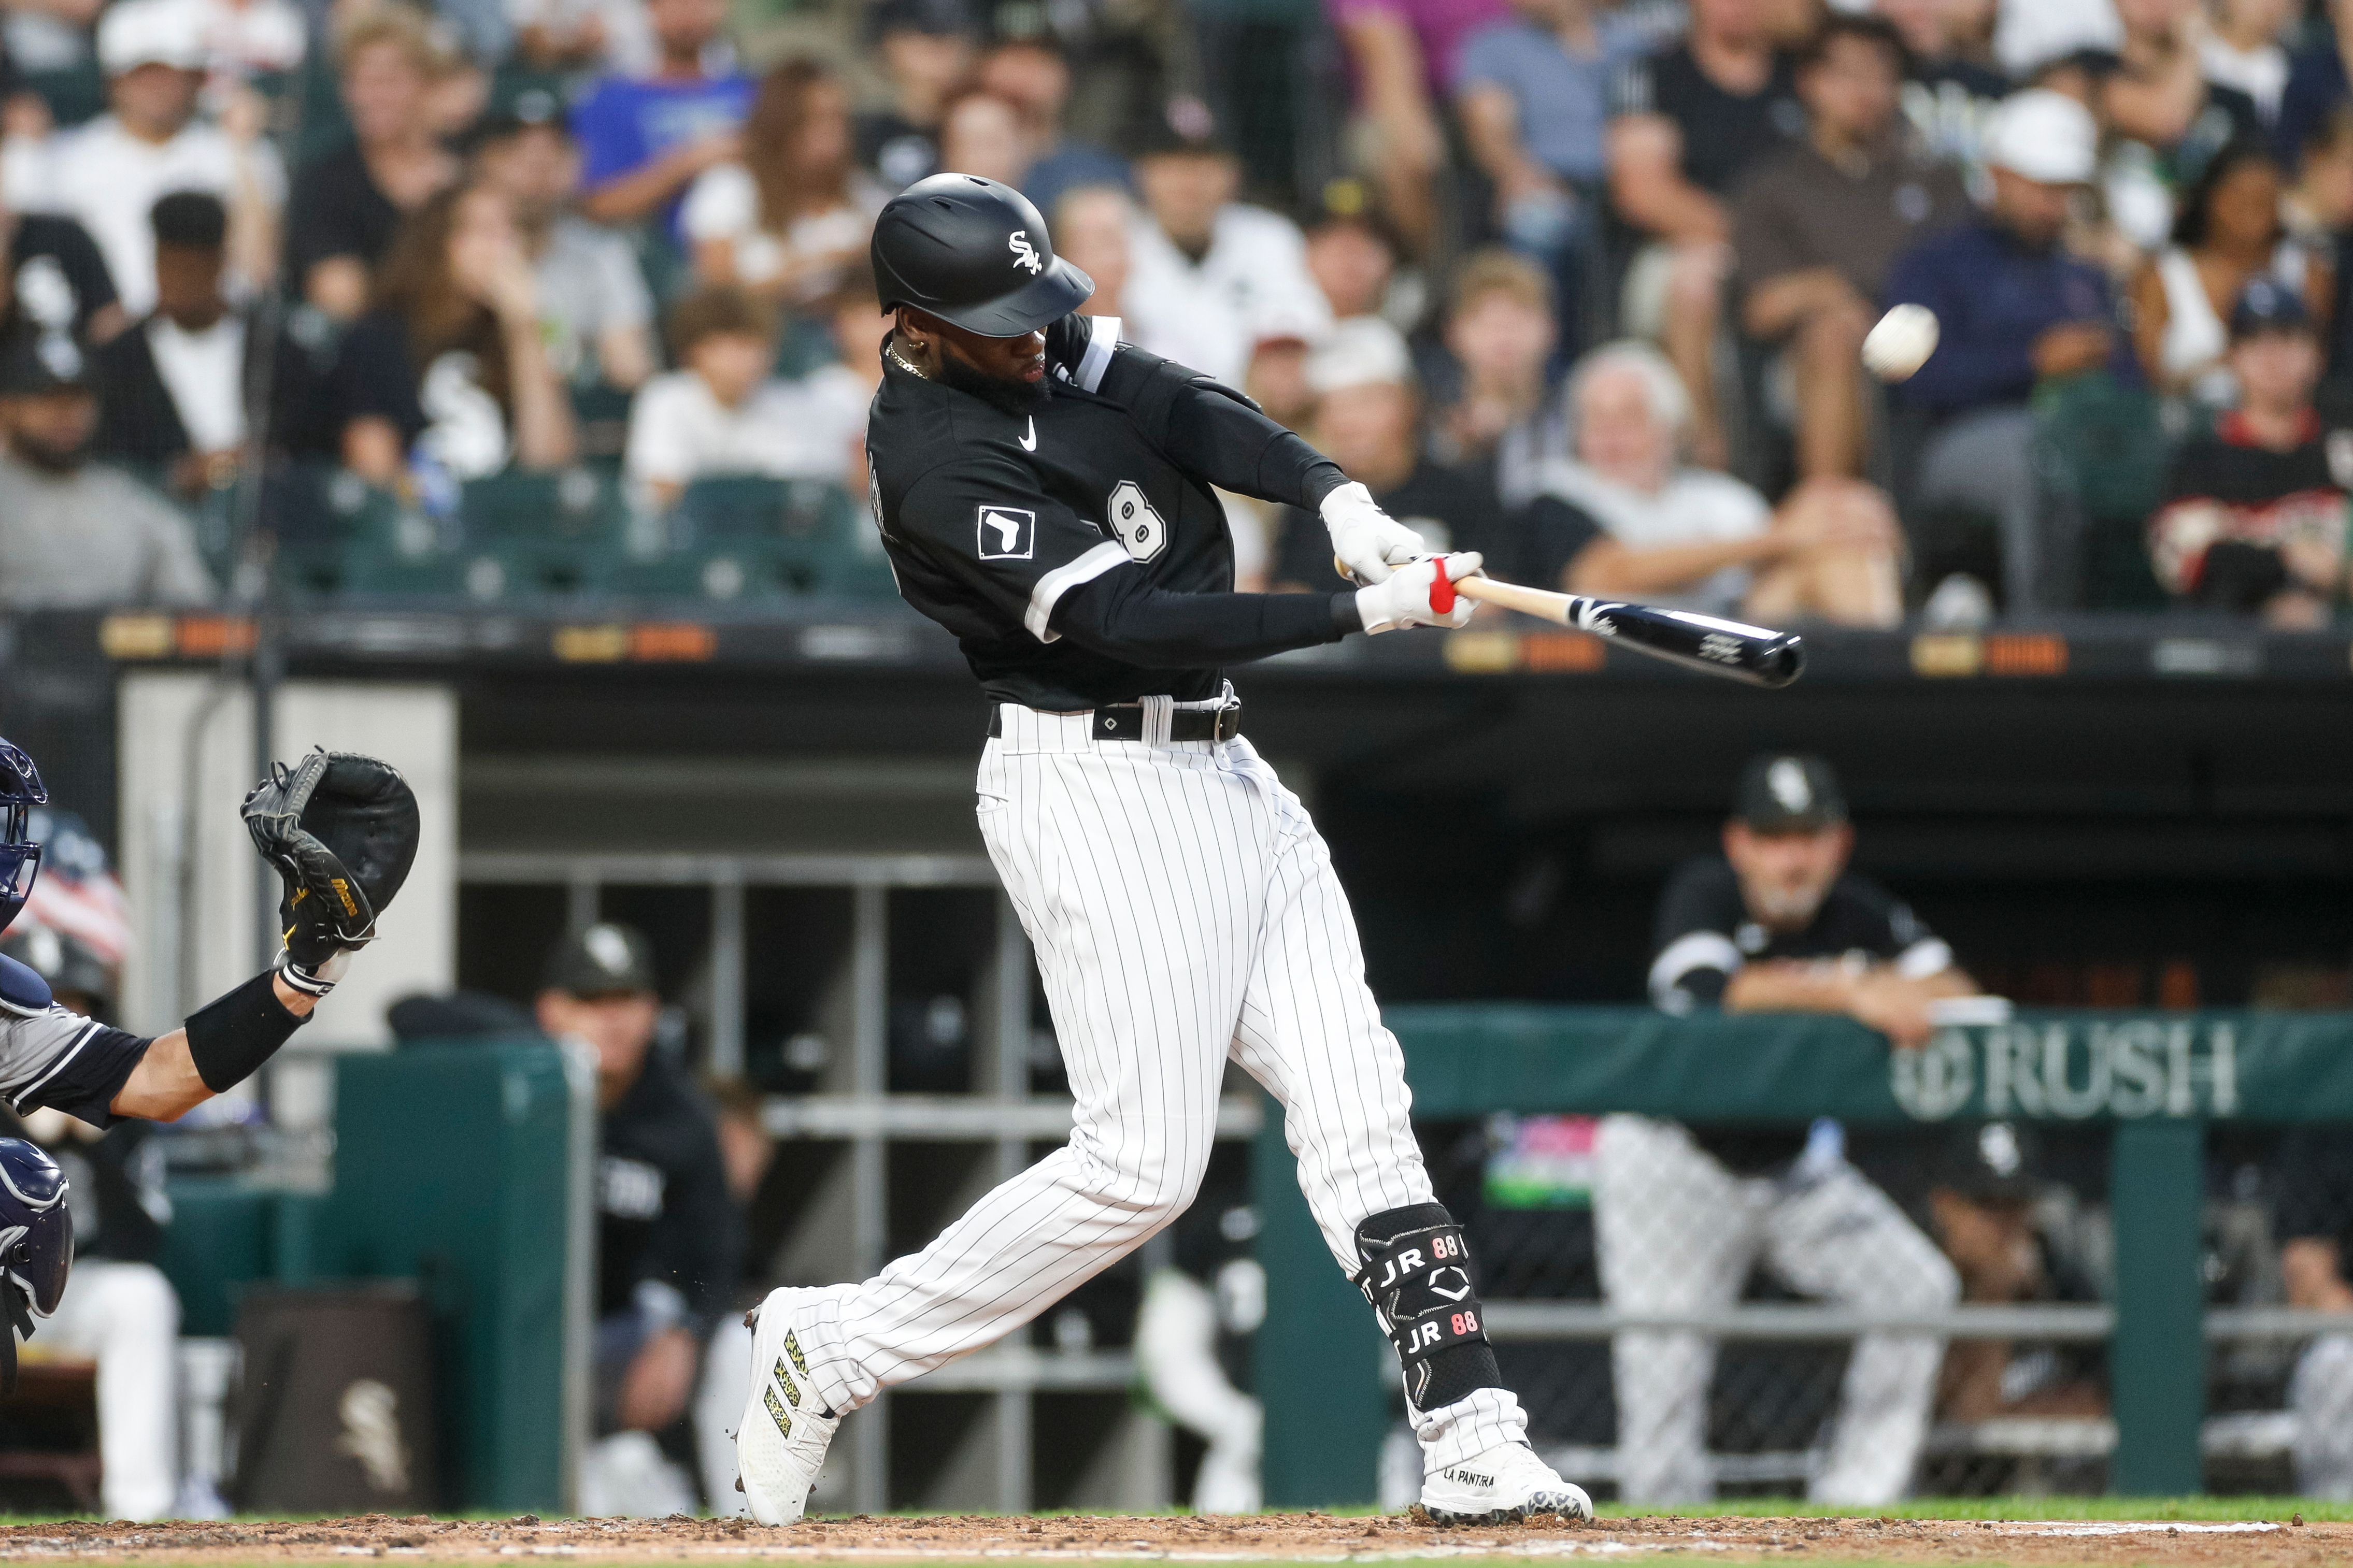 Luis Robert shushing Cubs fans would be iconic if the White Sox weren't  trash 